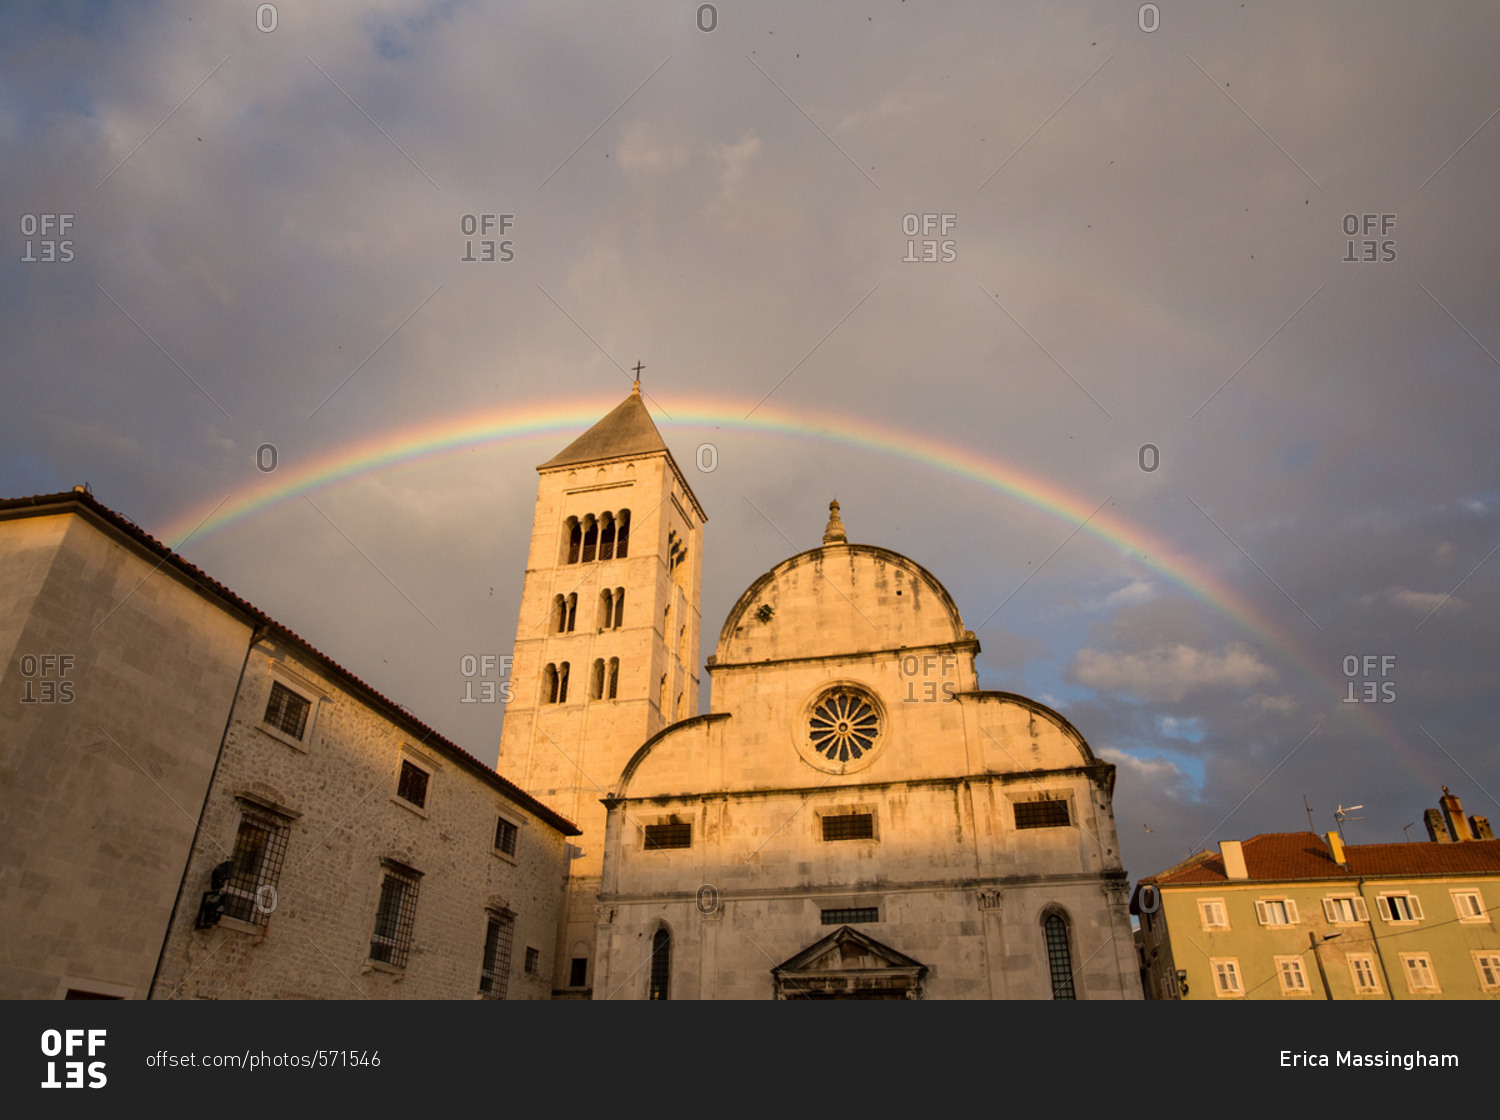 A late afternoon rainbow over the town of Zadar, Croatia